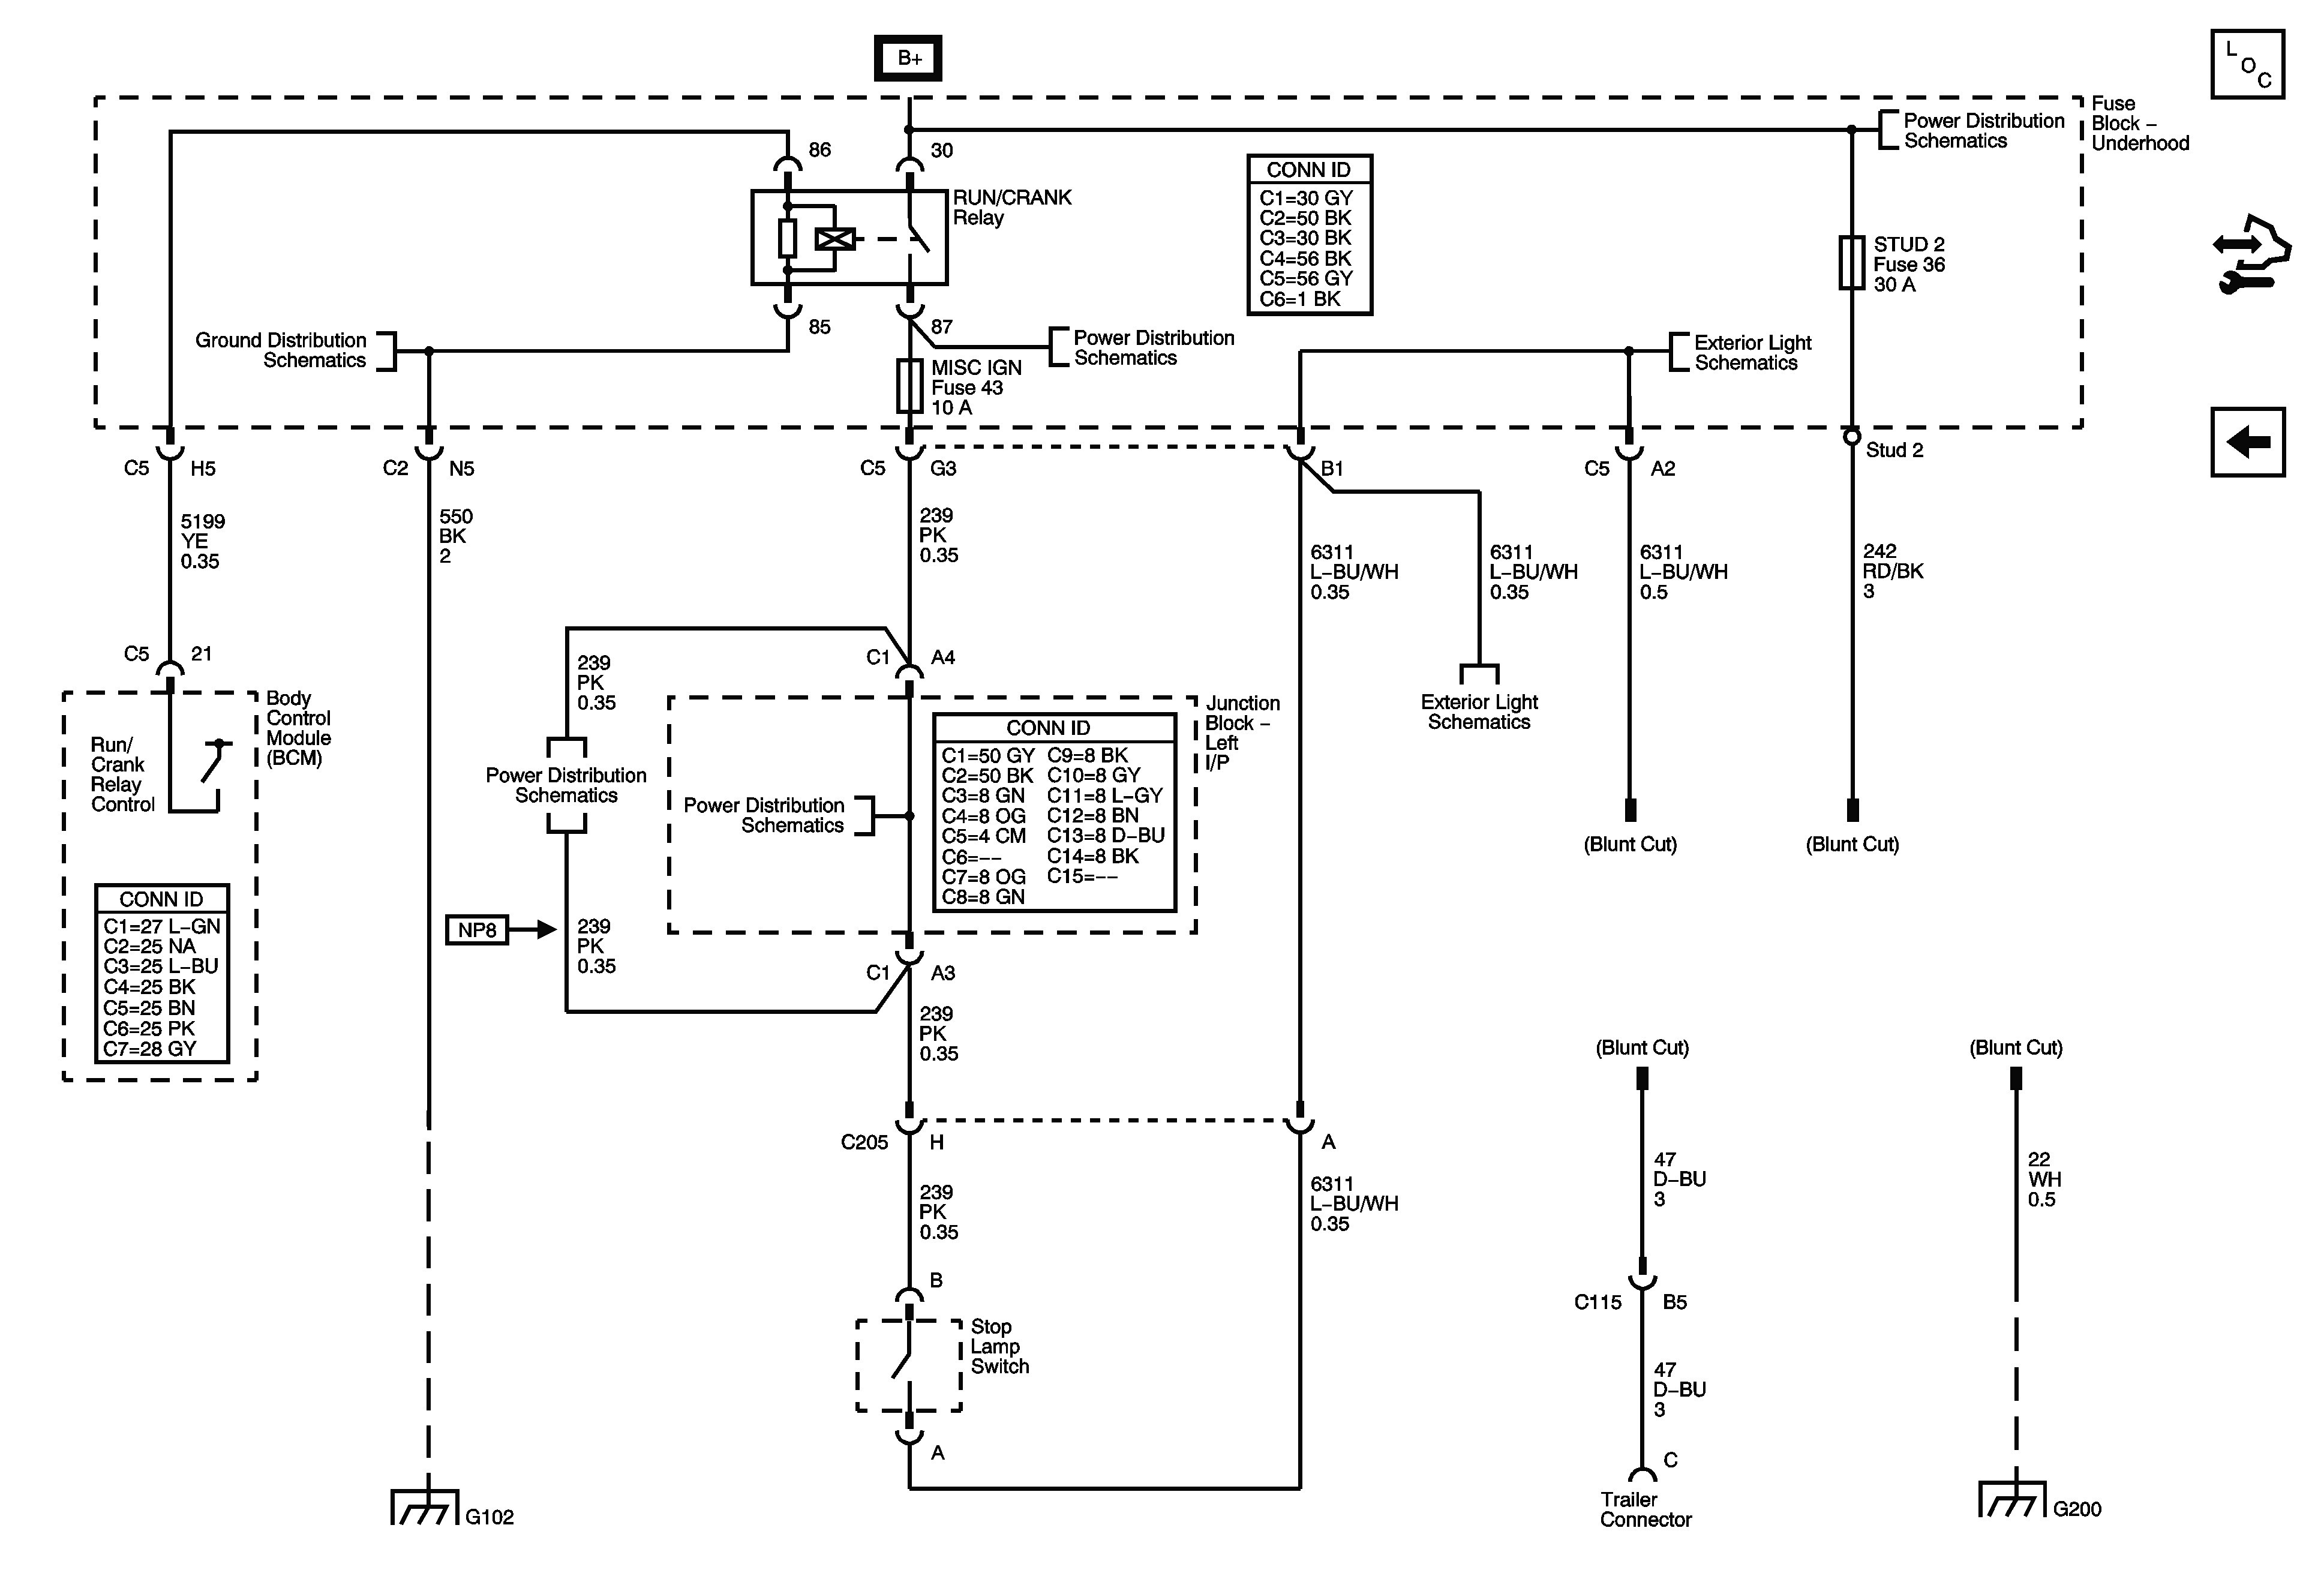 Wiring Diagram For Smart Car Refrence Prodigy Brake Controller Wiring Instructions P3 Diagram Smart Car